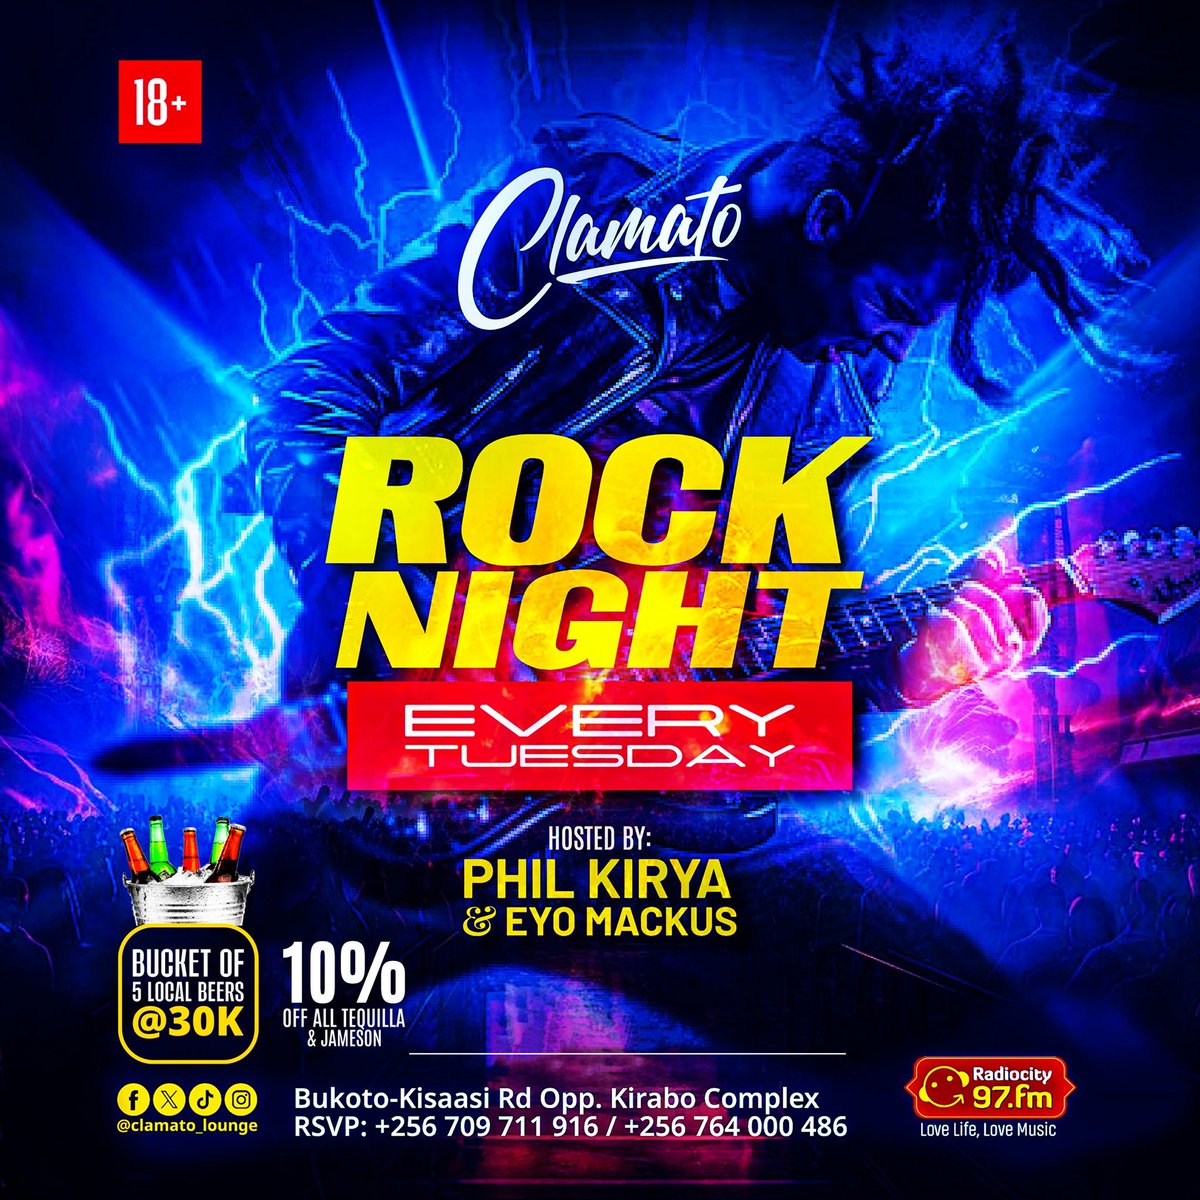 Clear your schedule for tomorrow after work, we shall be at @clamato_lounge for rock night with @PhilKirya  and @EyoMackus . #ClamatoRockTuesdays